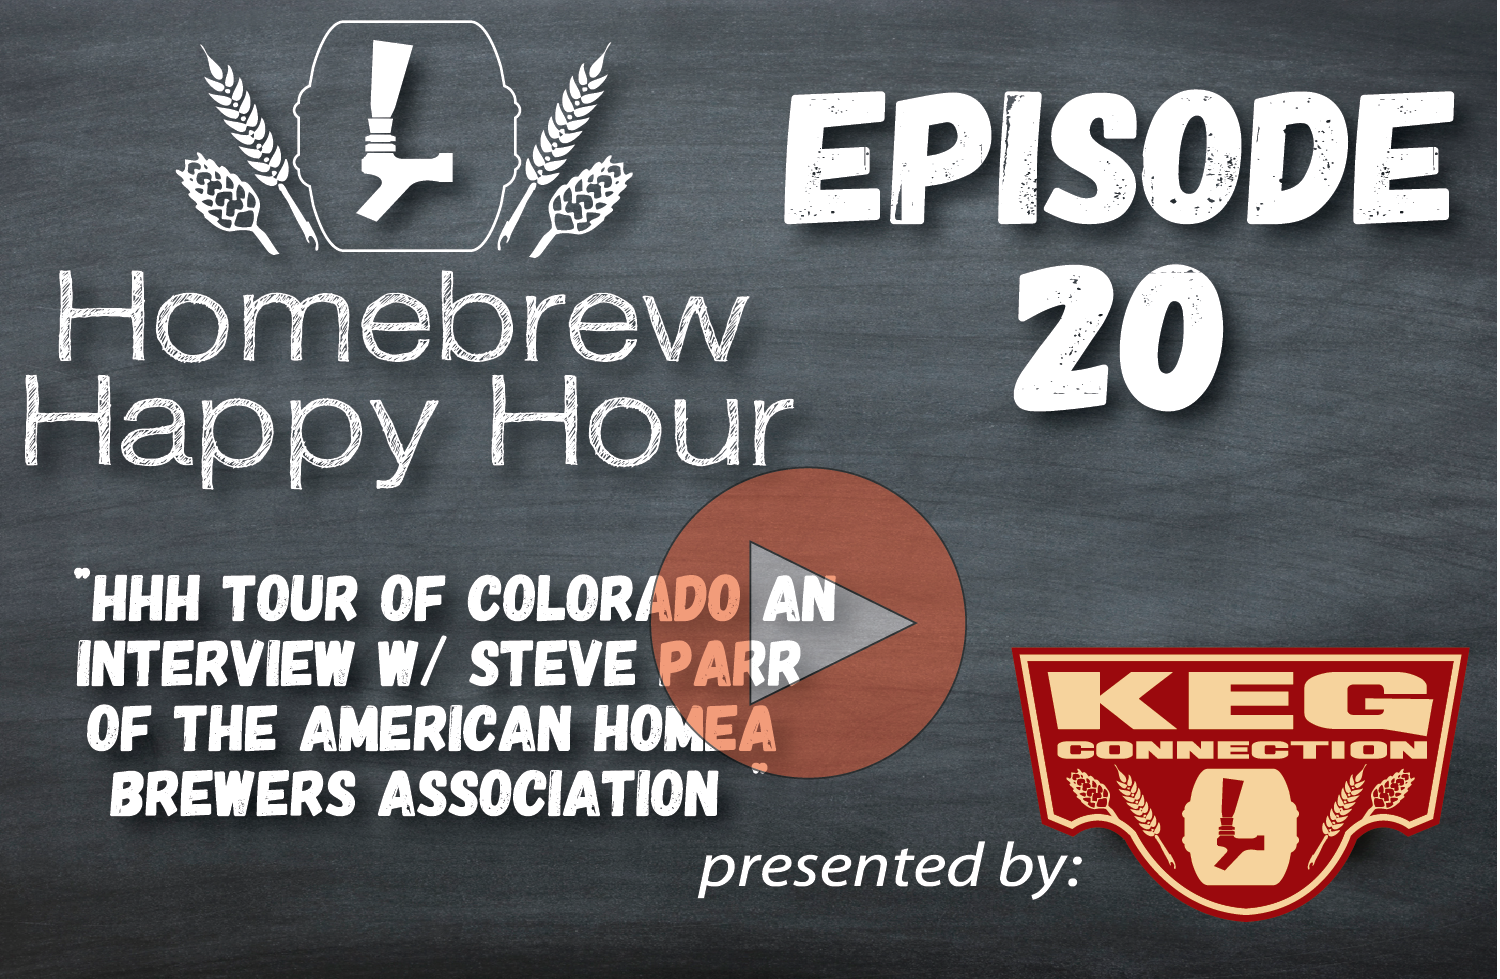 HHH Tour of Colorado: An Interview w/ Steve Parr of the American Homebrewers Association! — HHH Ep. 020